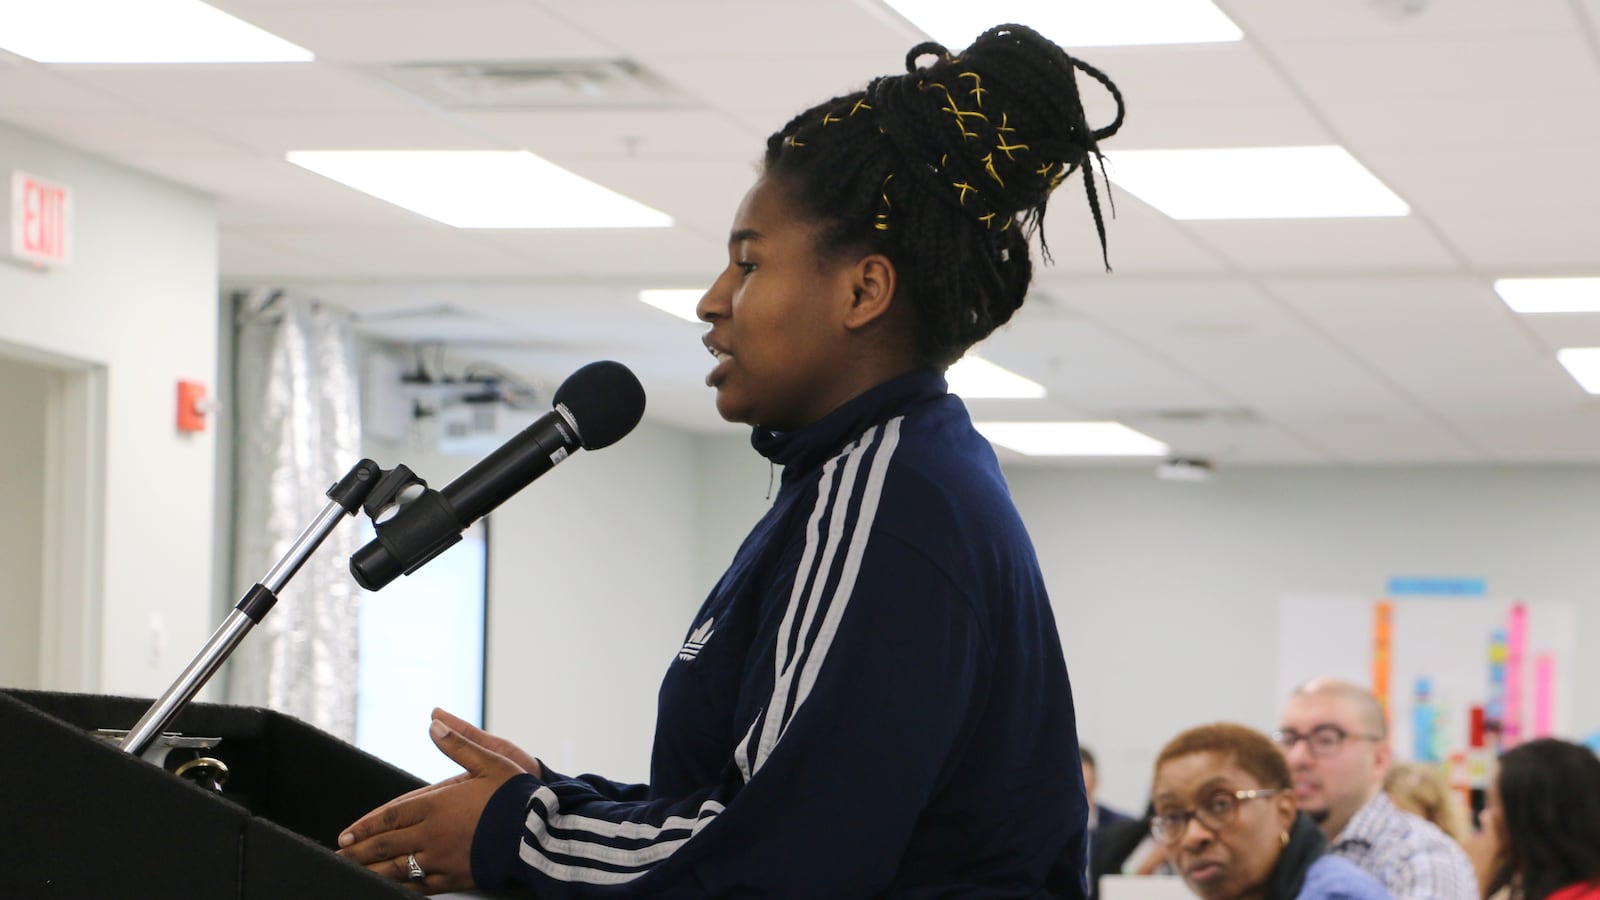 Sierra Etes, the student-body president at Science Park High School, told the Newark Board of Education  that some students have described a “culturally insensitive climate” at the school.